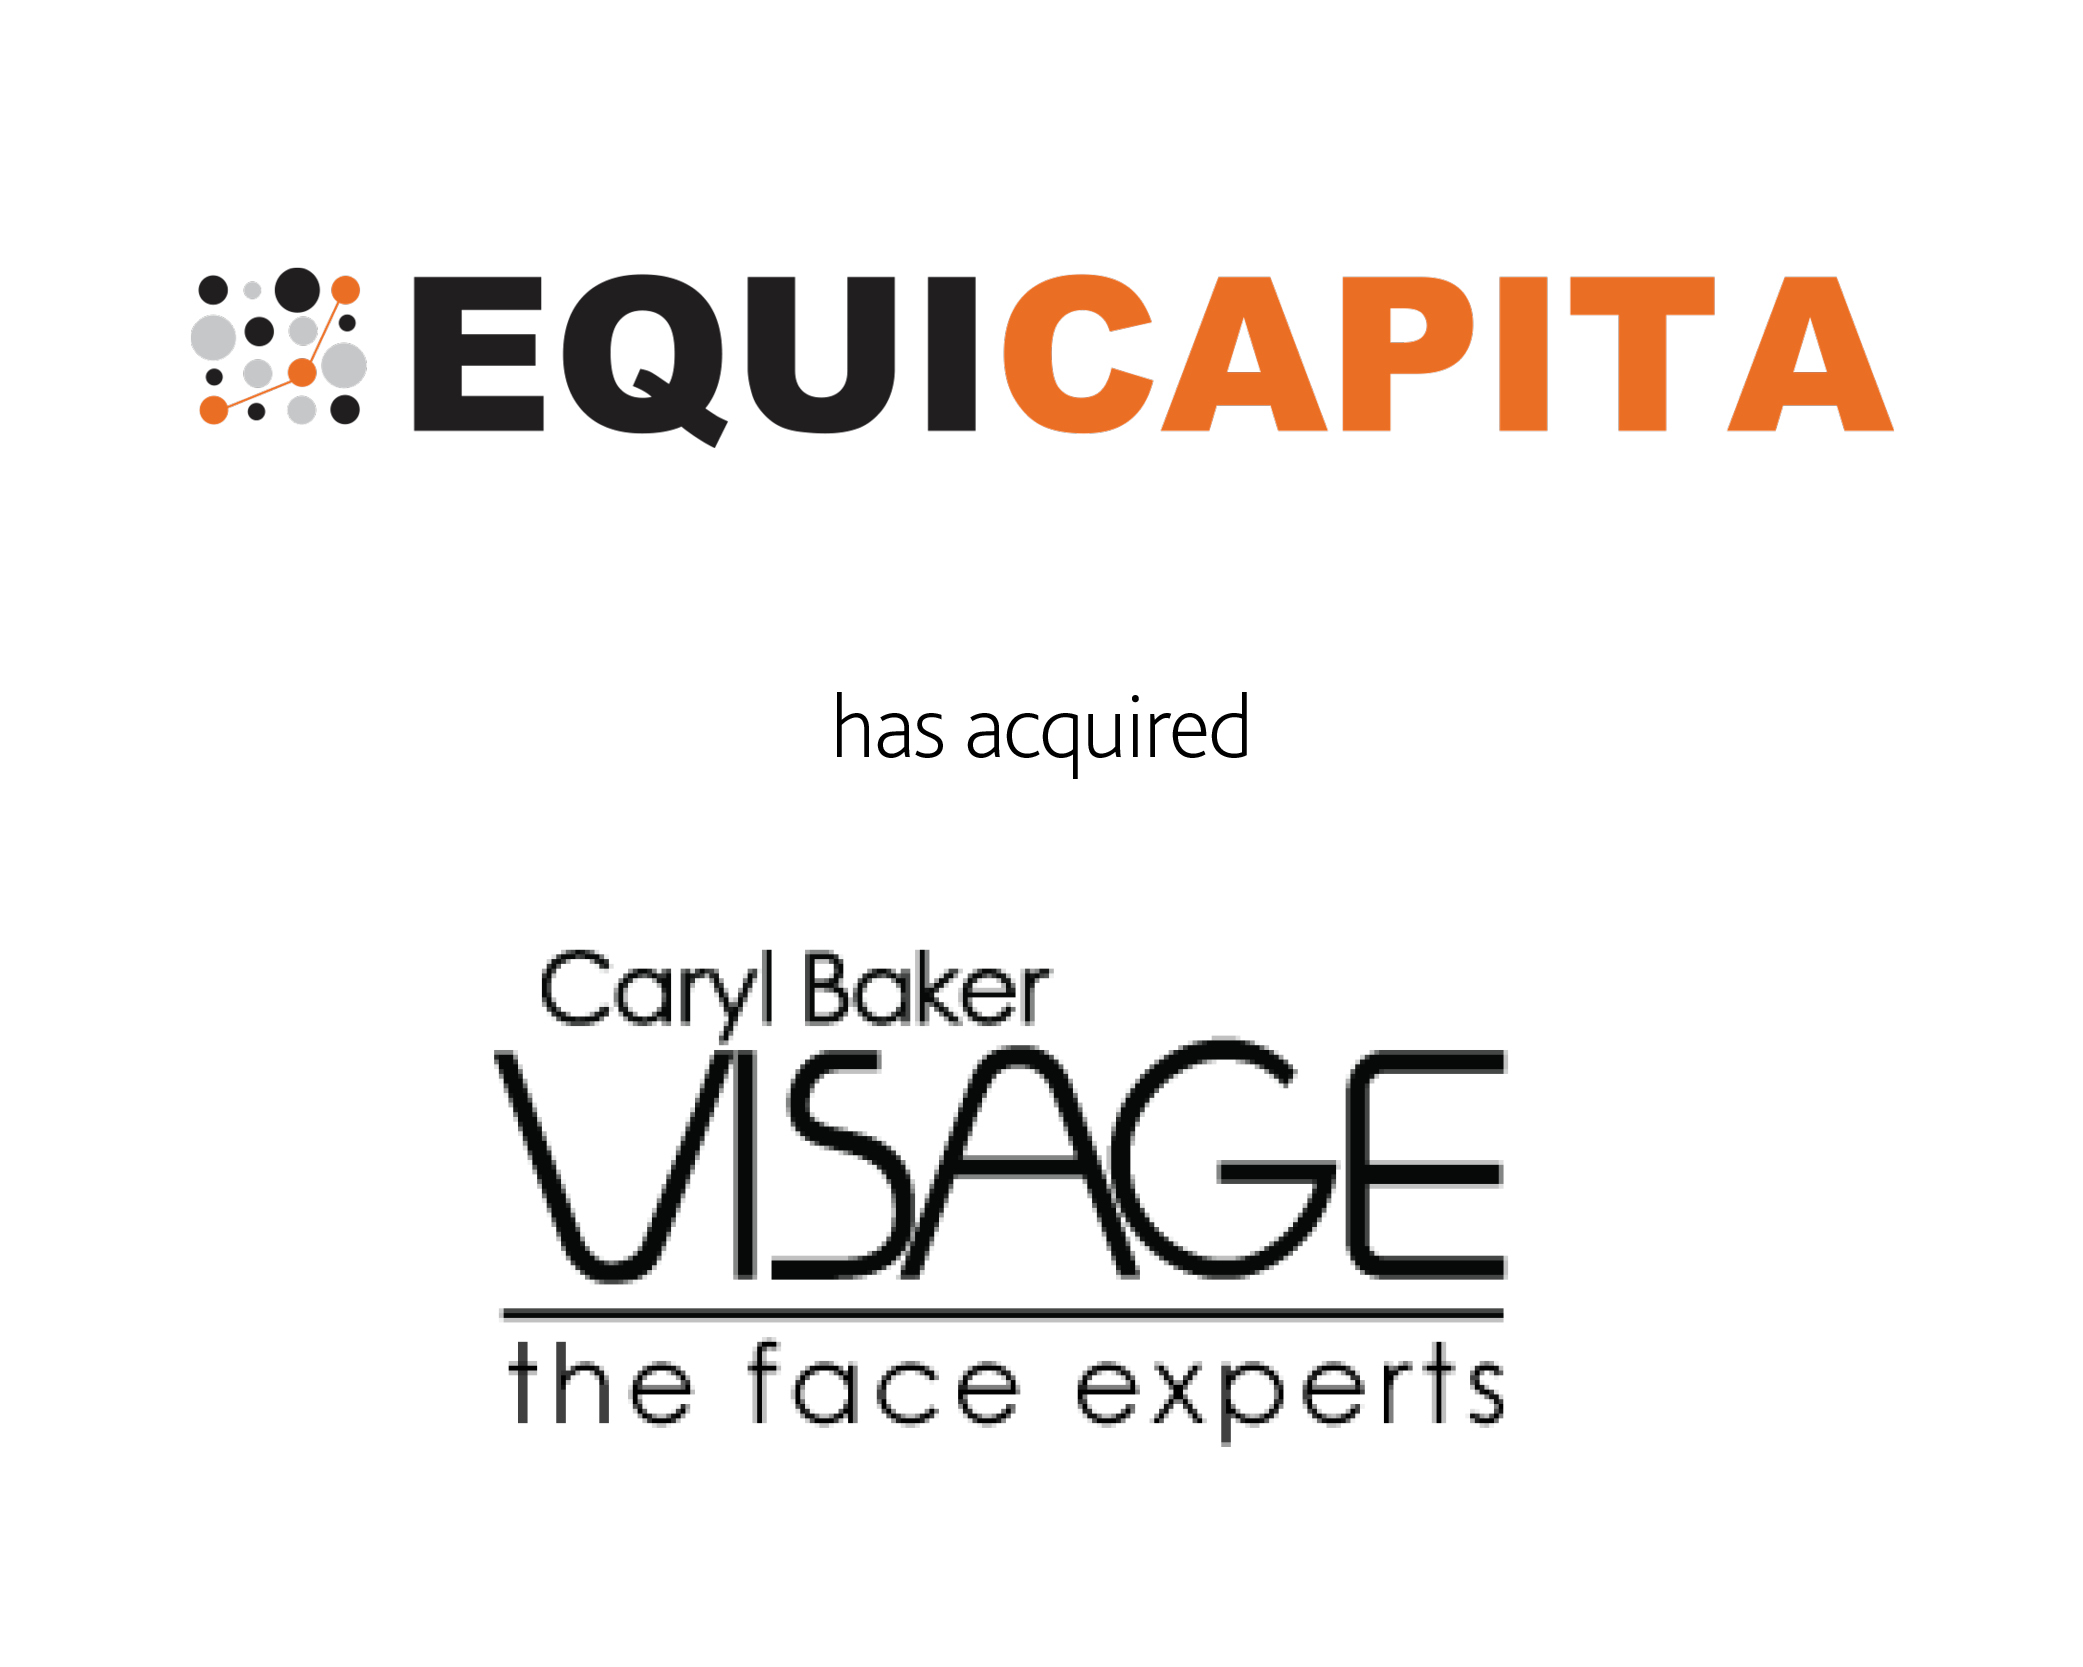 Equicapita Investment Corp. has acquired Visage Cosmetics Limited.